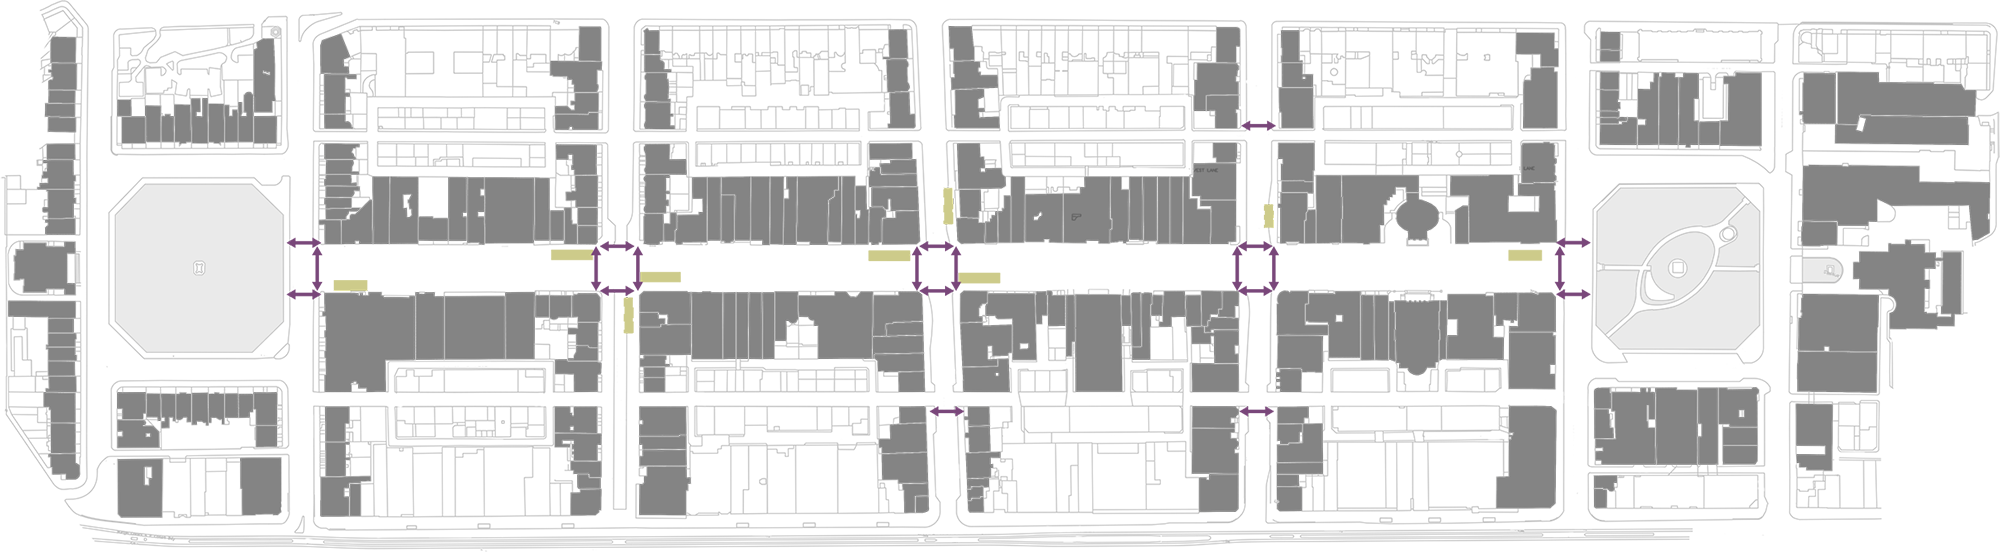 Drawing of accessibility provision throughout George Street.